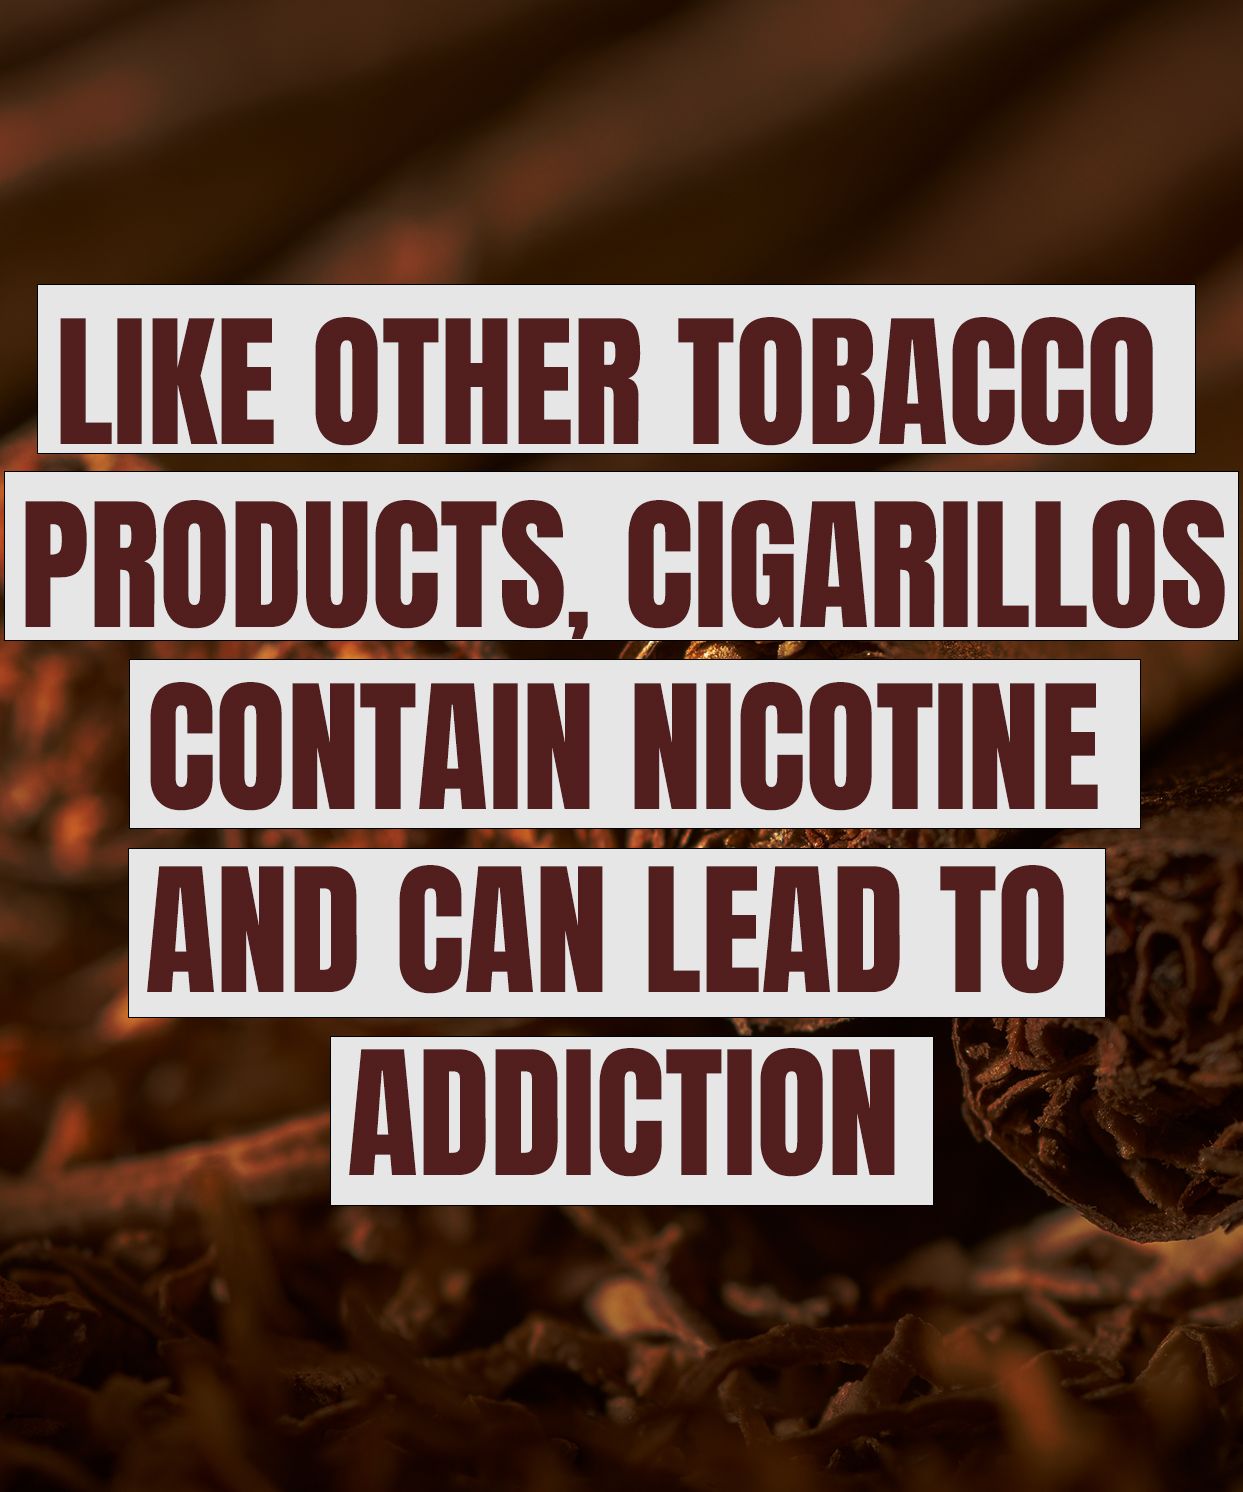 like other tobacco products, cigarillos contain nicotine and can lead to addiction